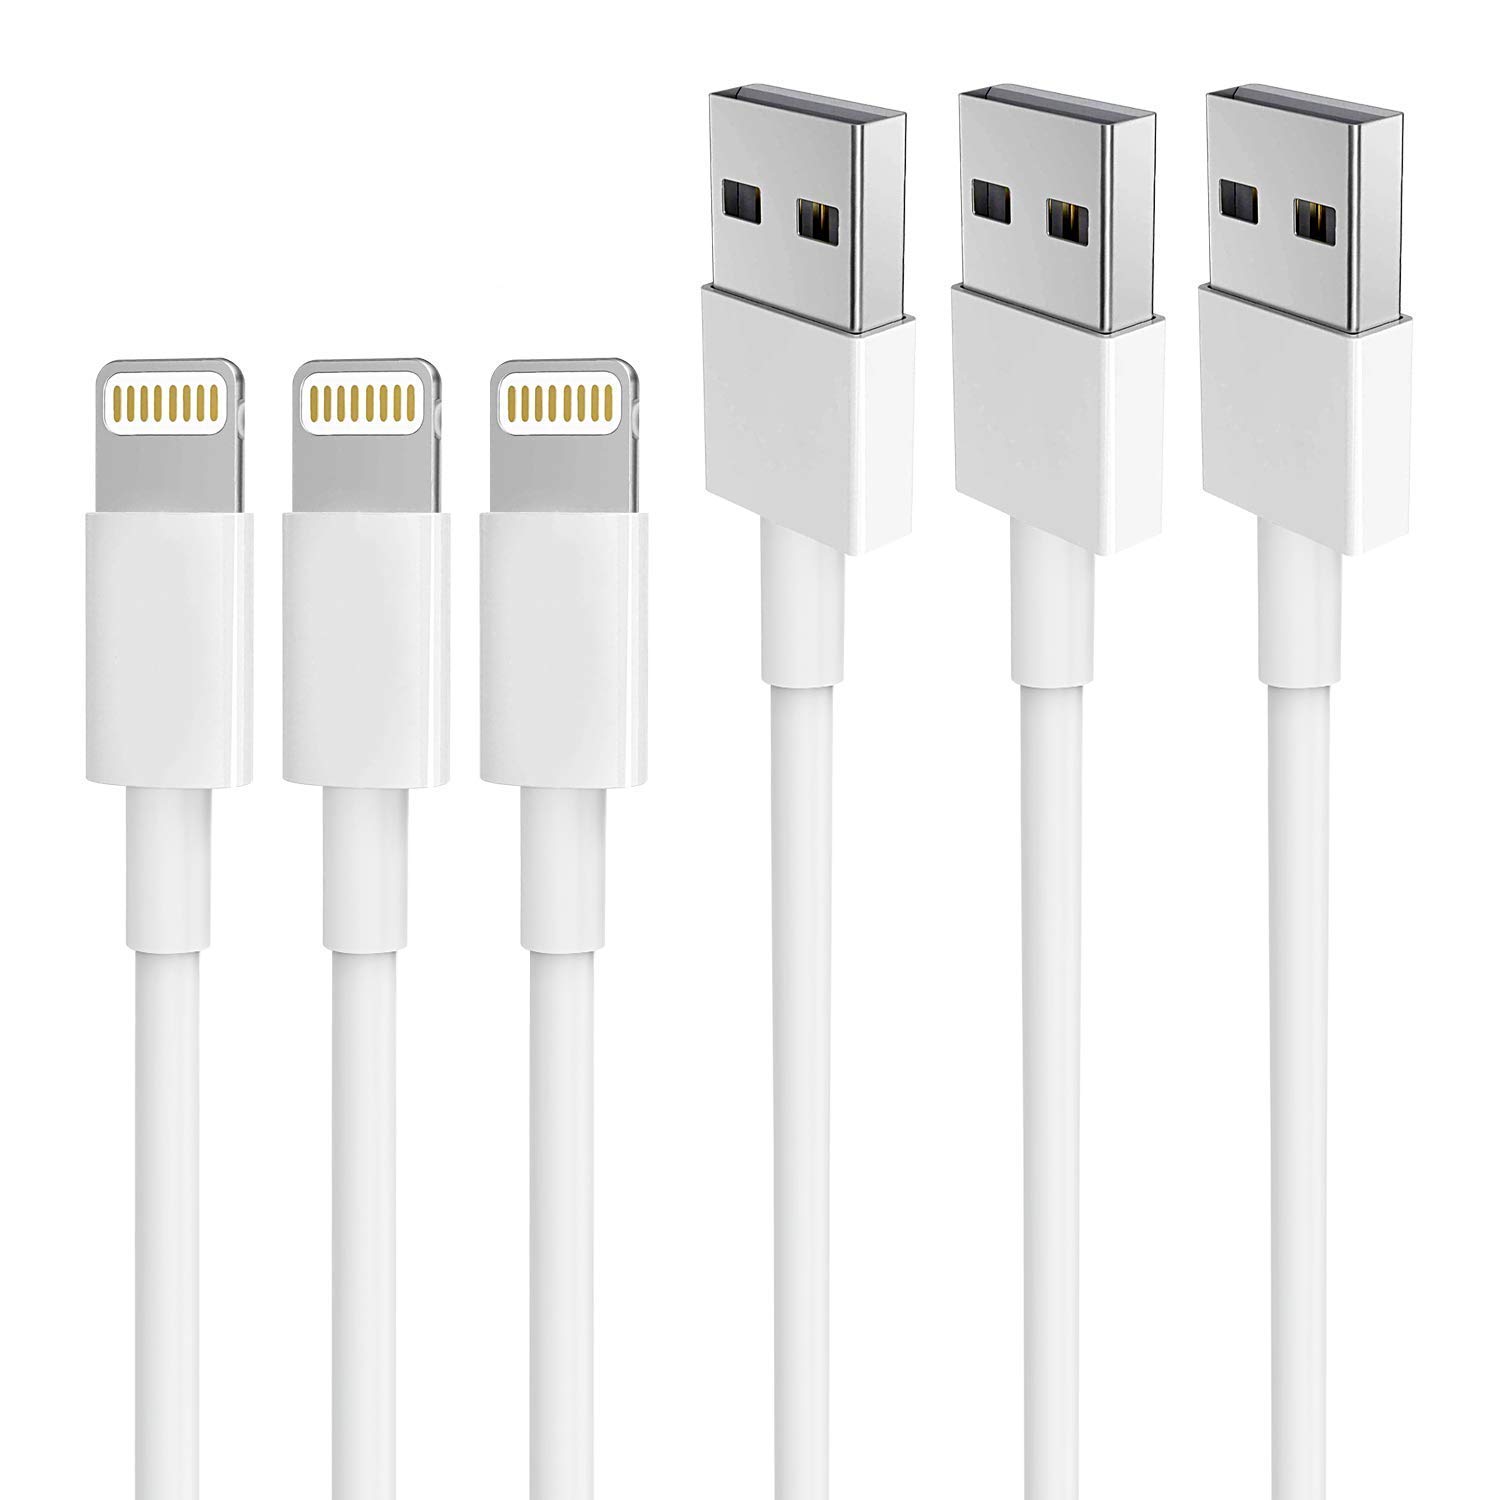 AUNC Extra Reach Tangle-Free iPhone Charger Cords, 3-Pack